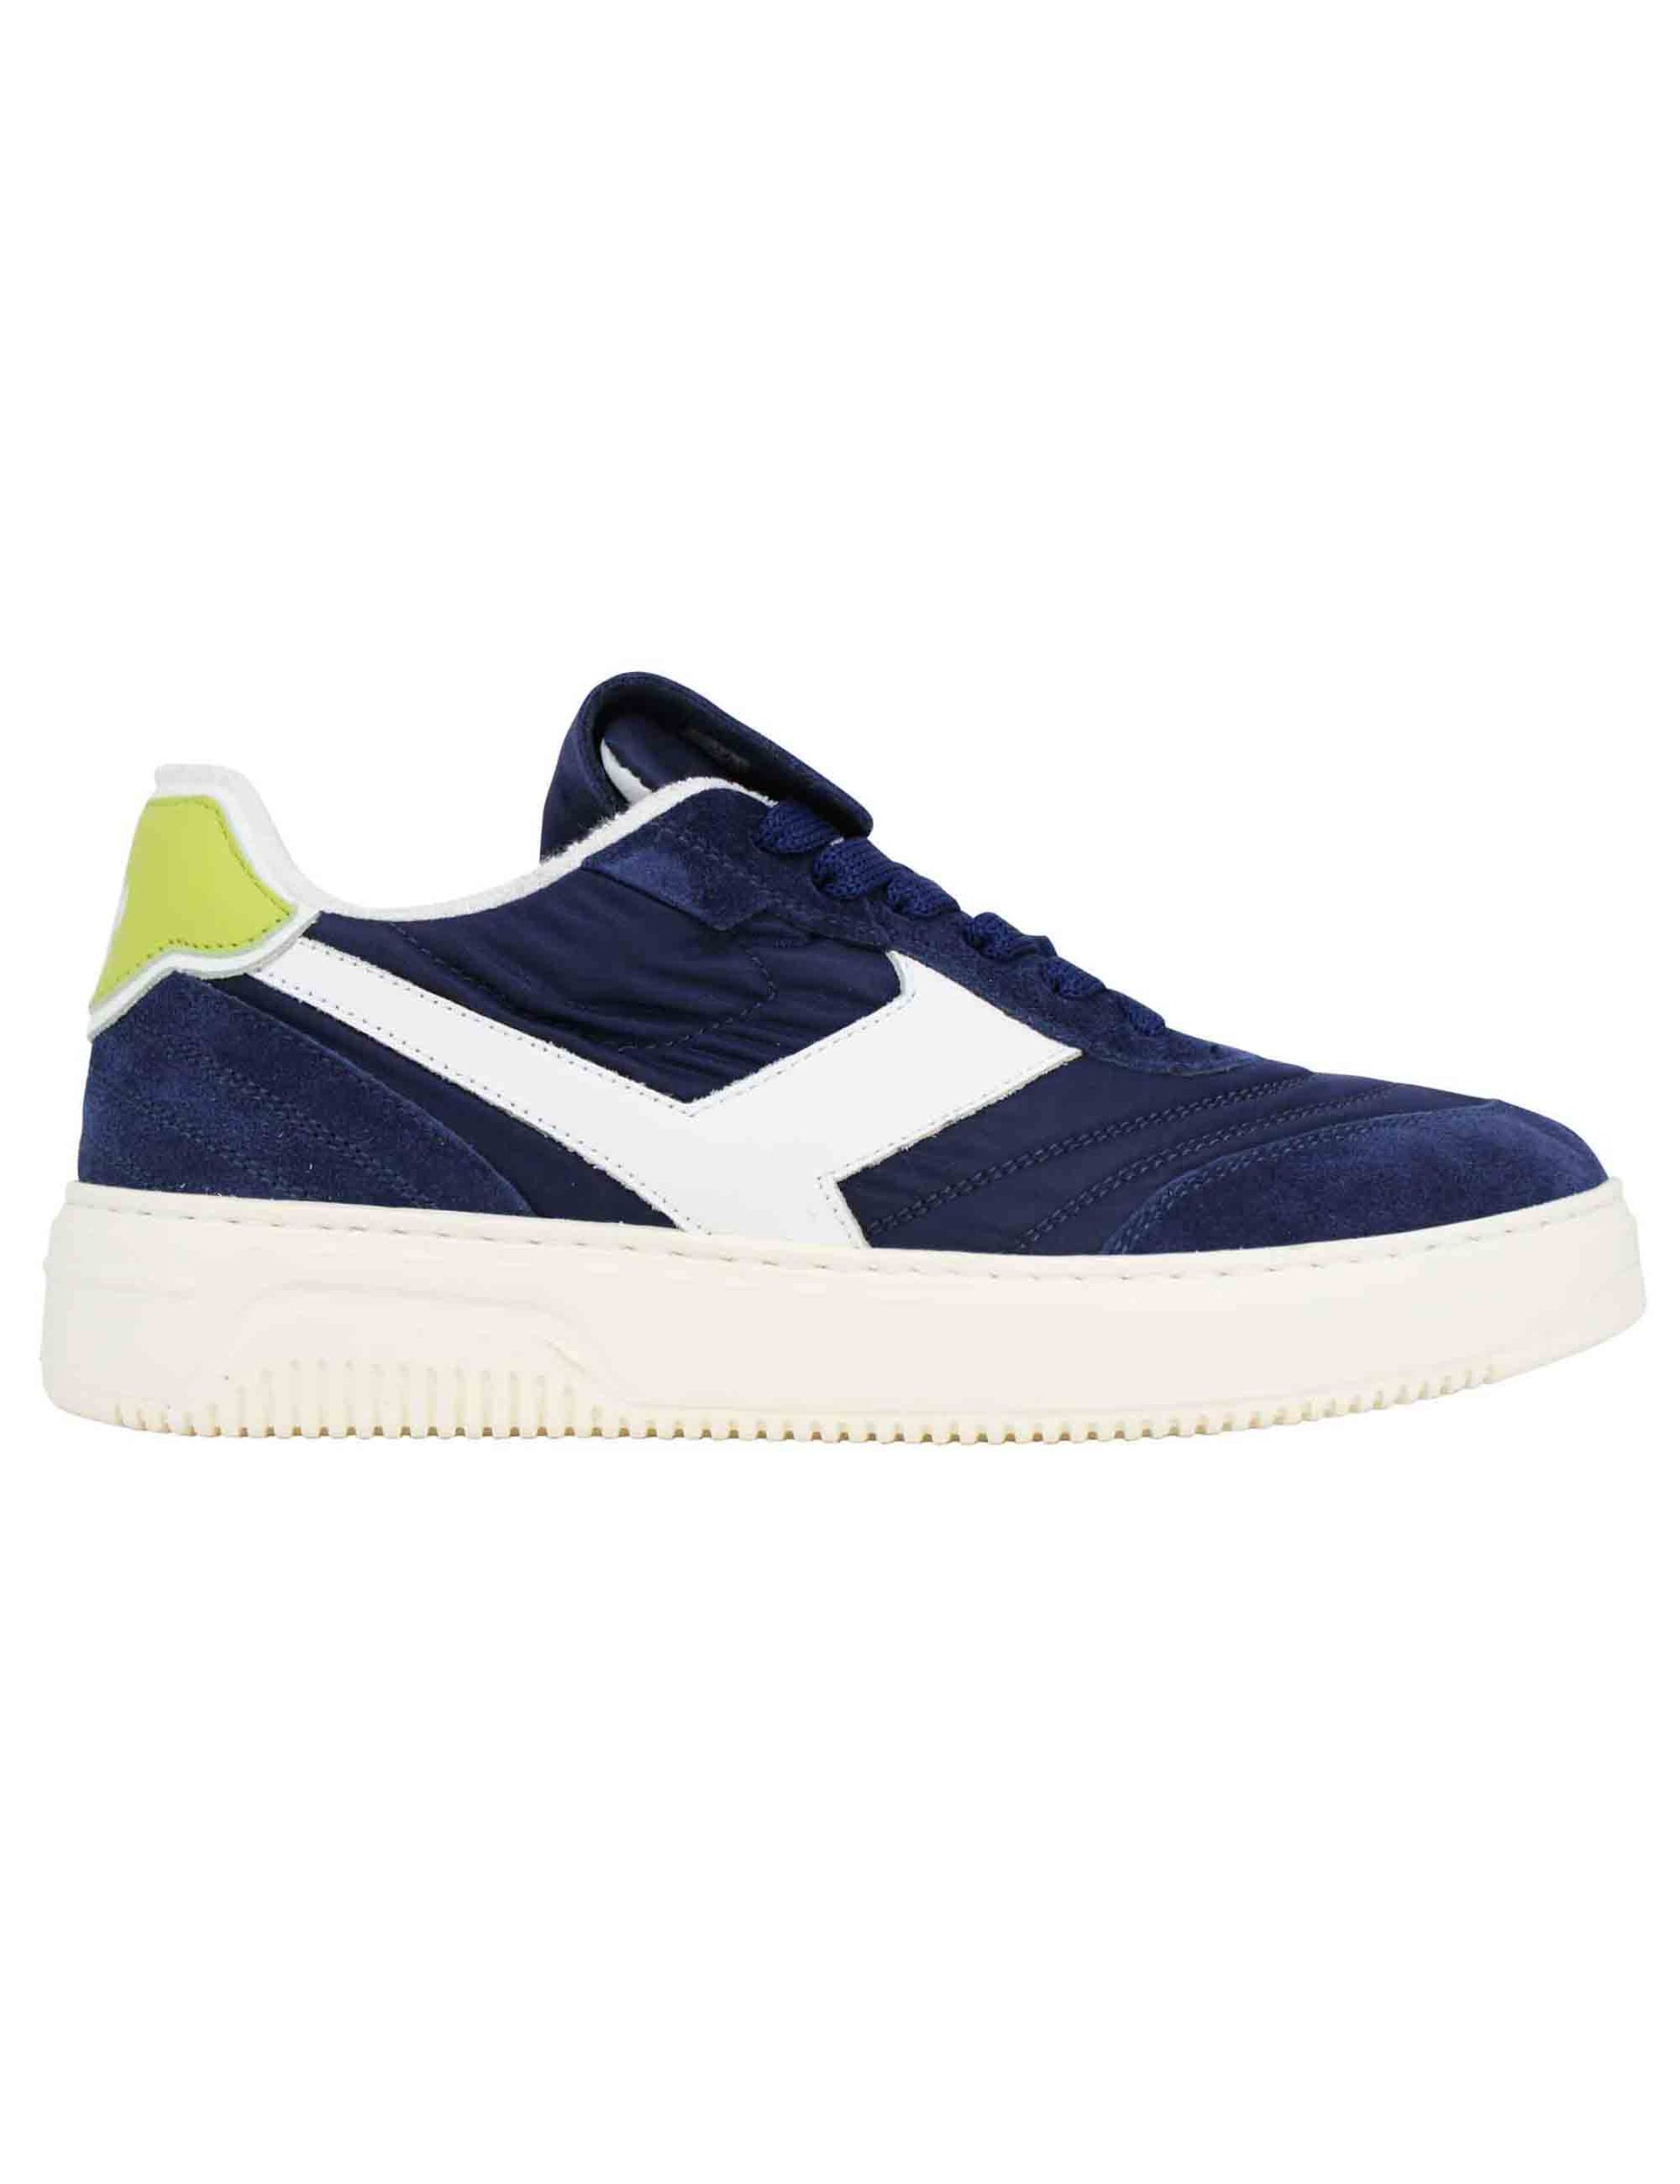 Pdo men's sneakers in blue leather and fabric